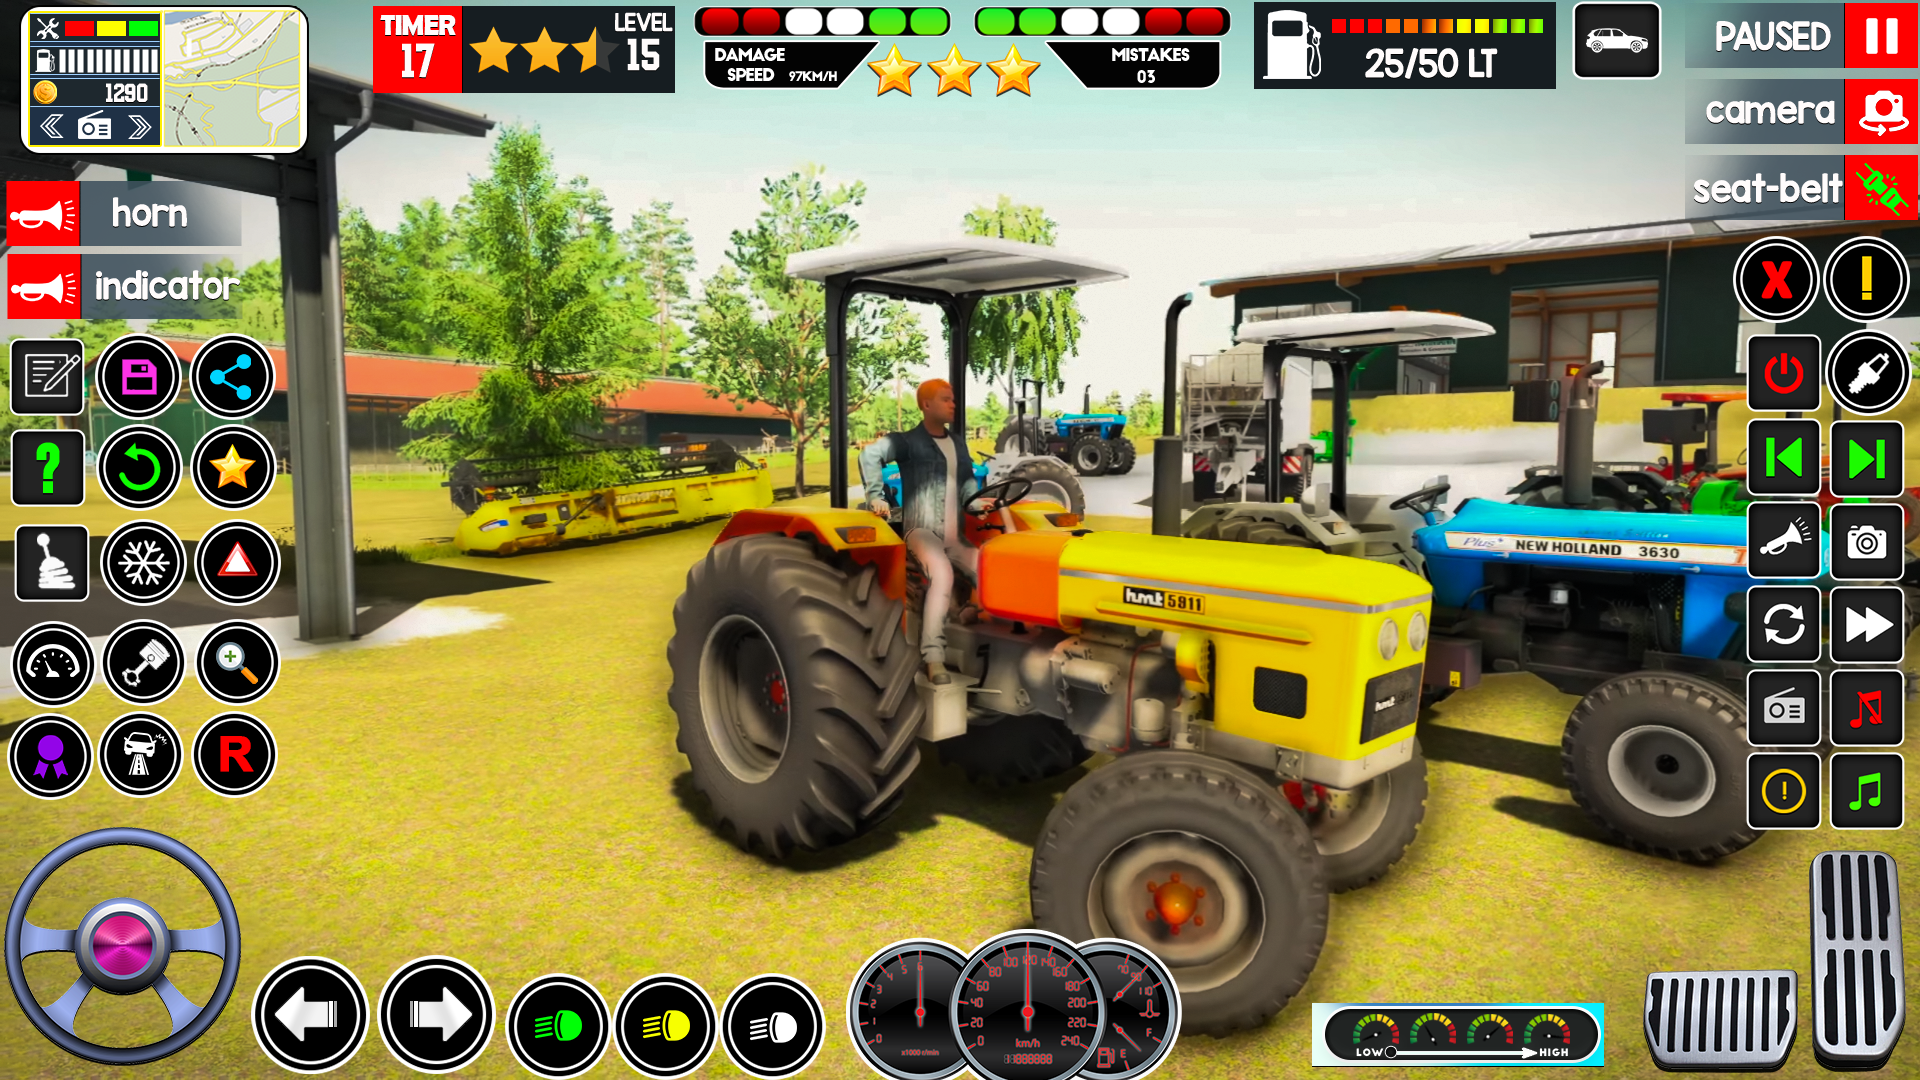 Screenshot 1 of Village Tractor Driving Game 3.0